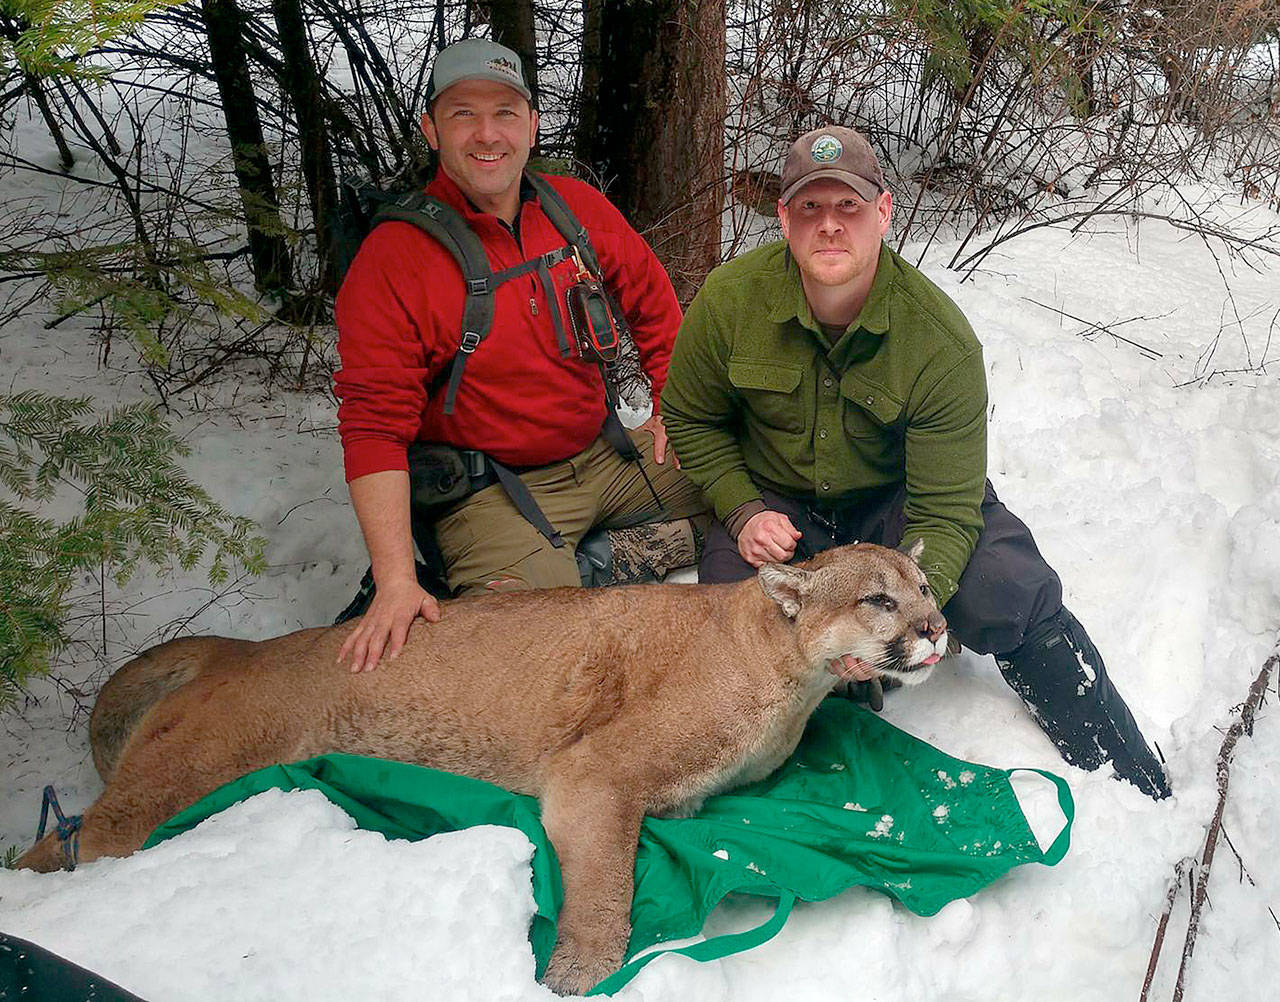 He was a monster': 197-pound cougar captured by biologists | HeraldNet.com